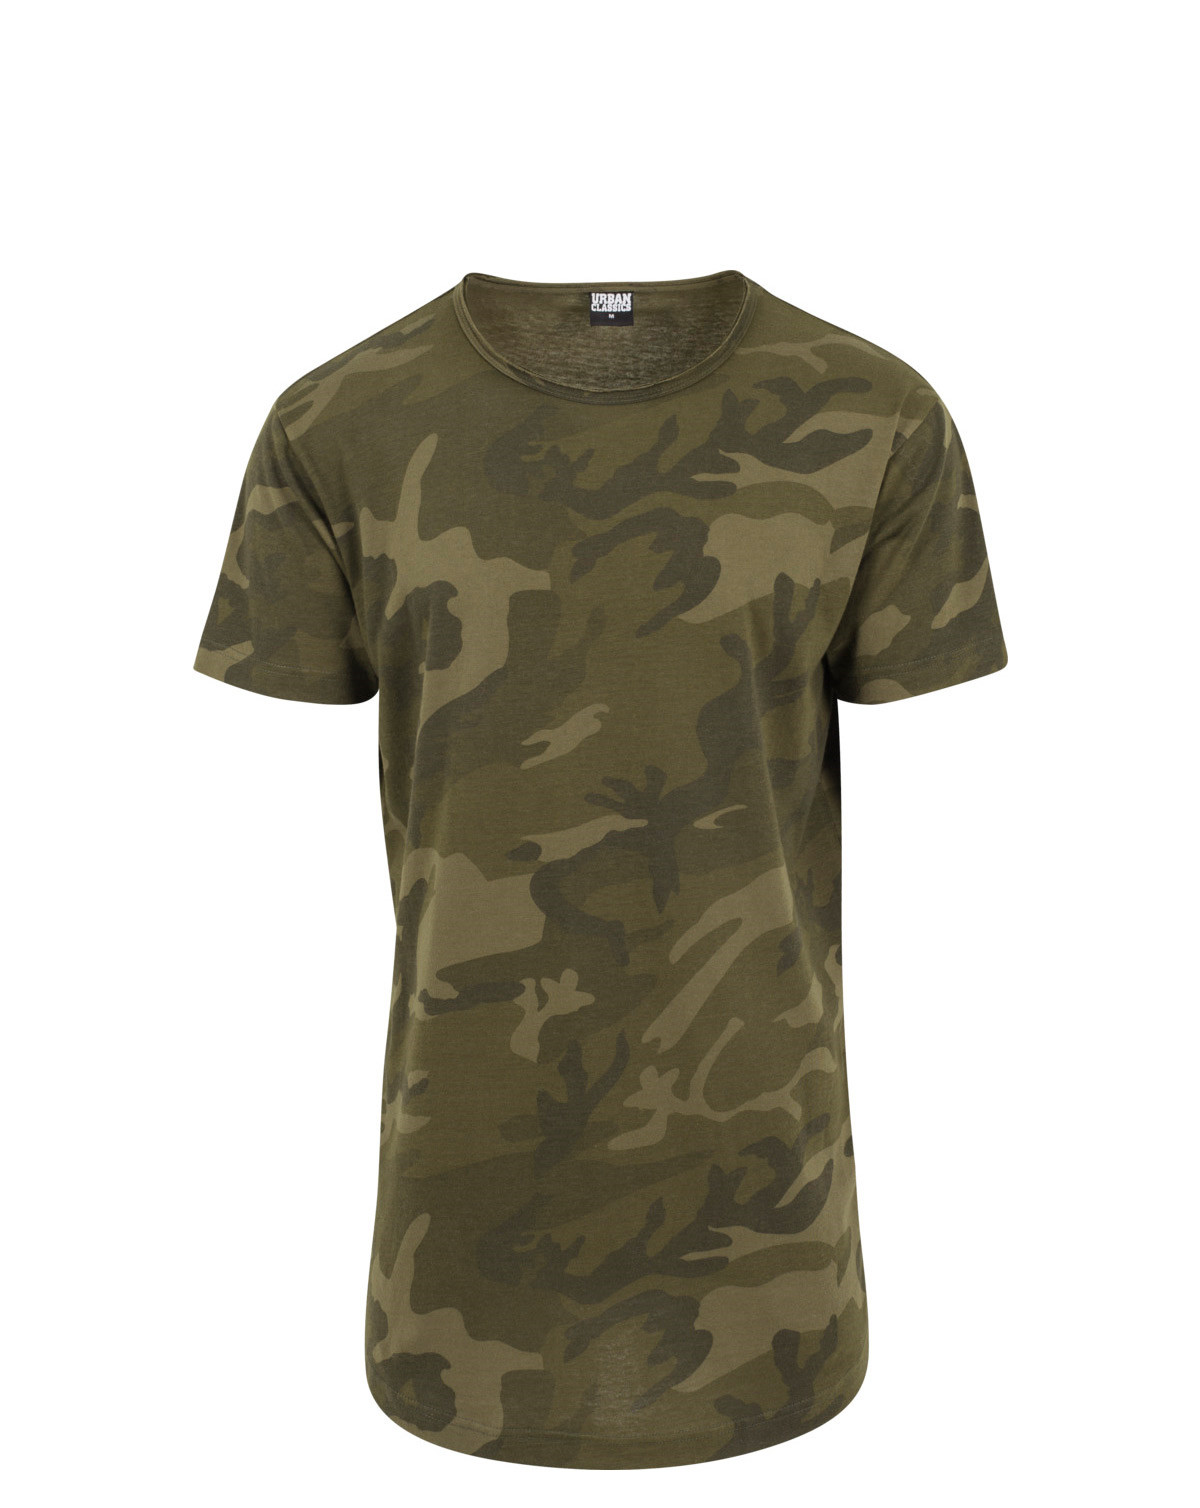 5: Urban Classics Lang Camouflage T-shirt (Oliven Camo, S)